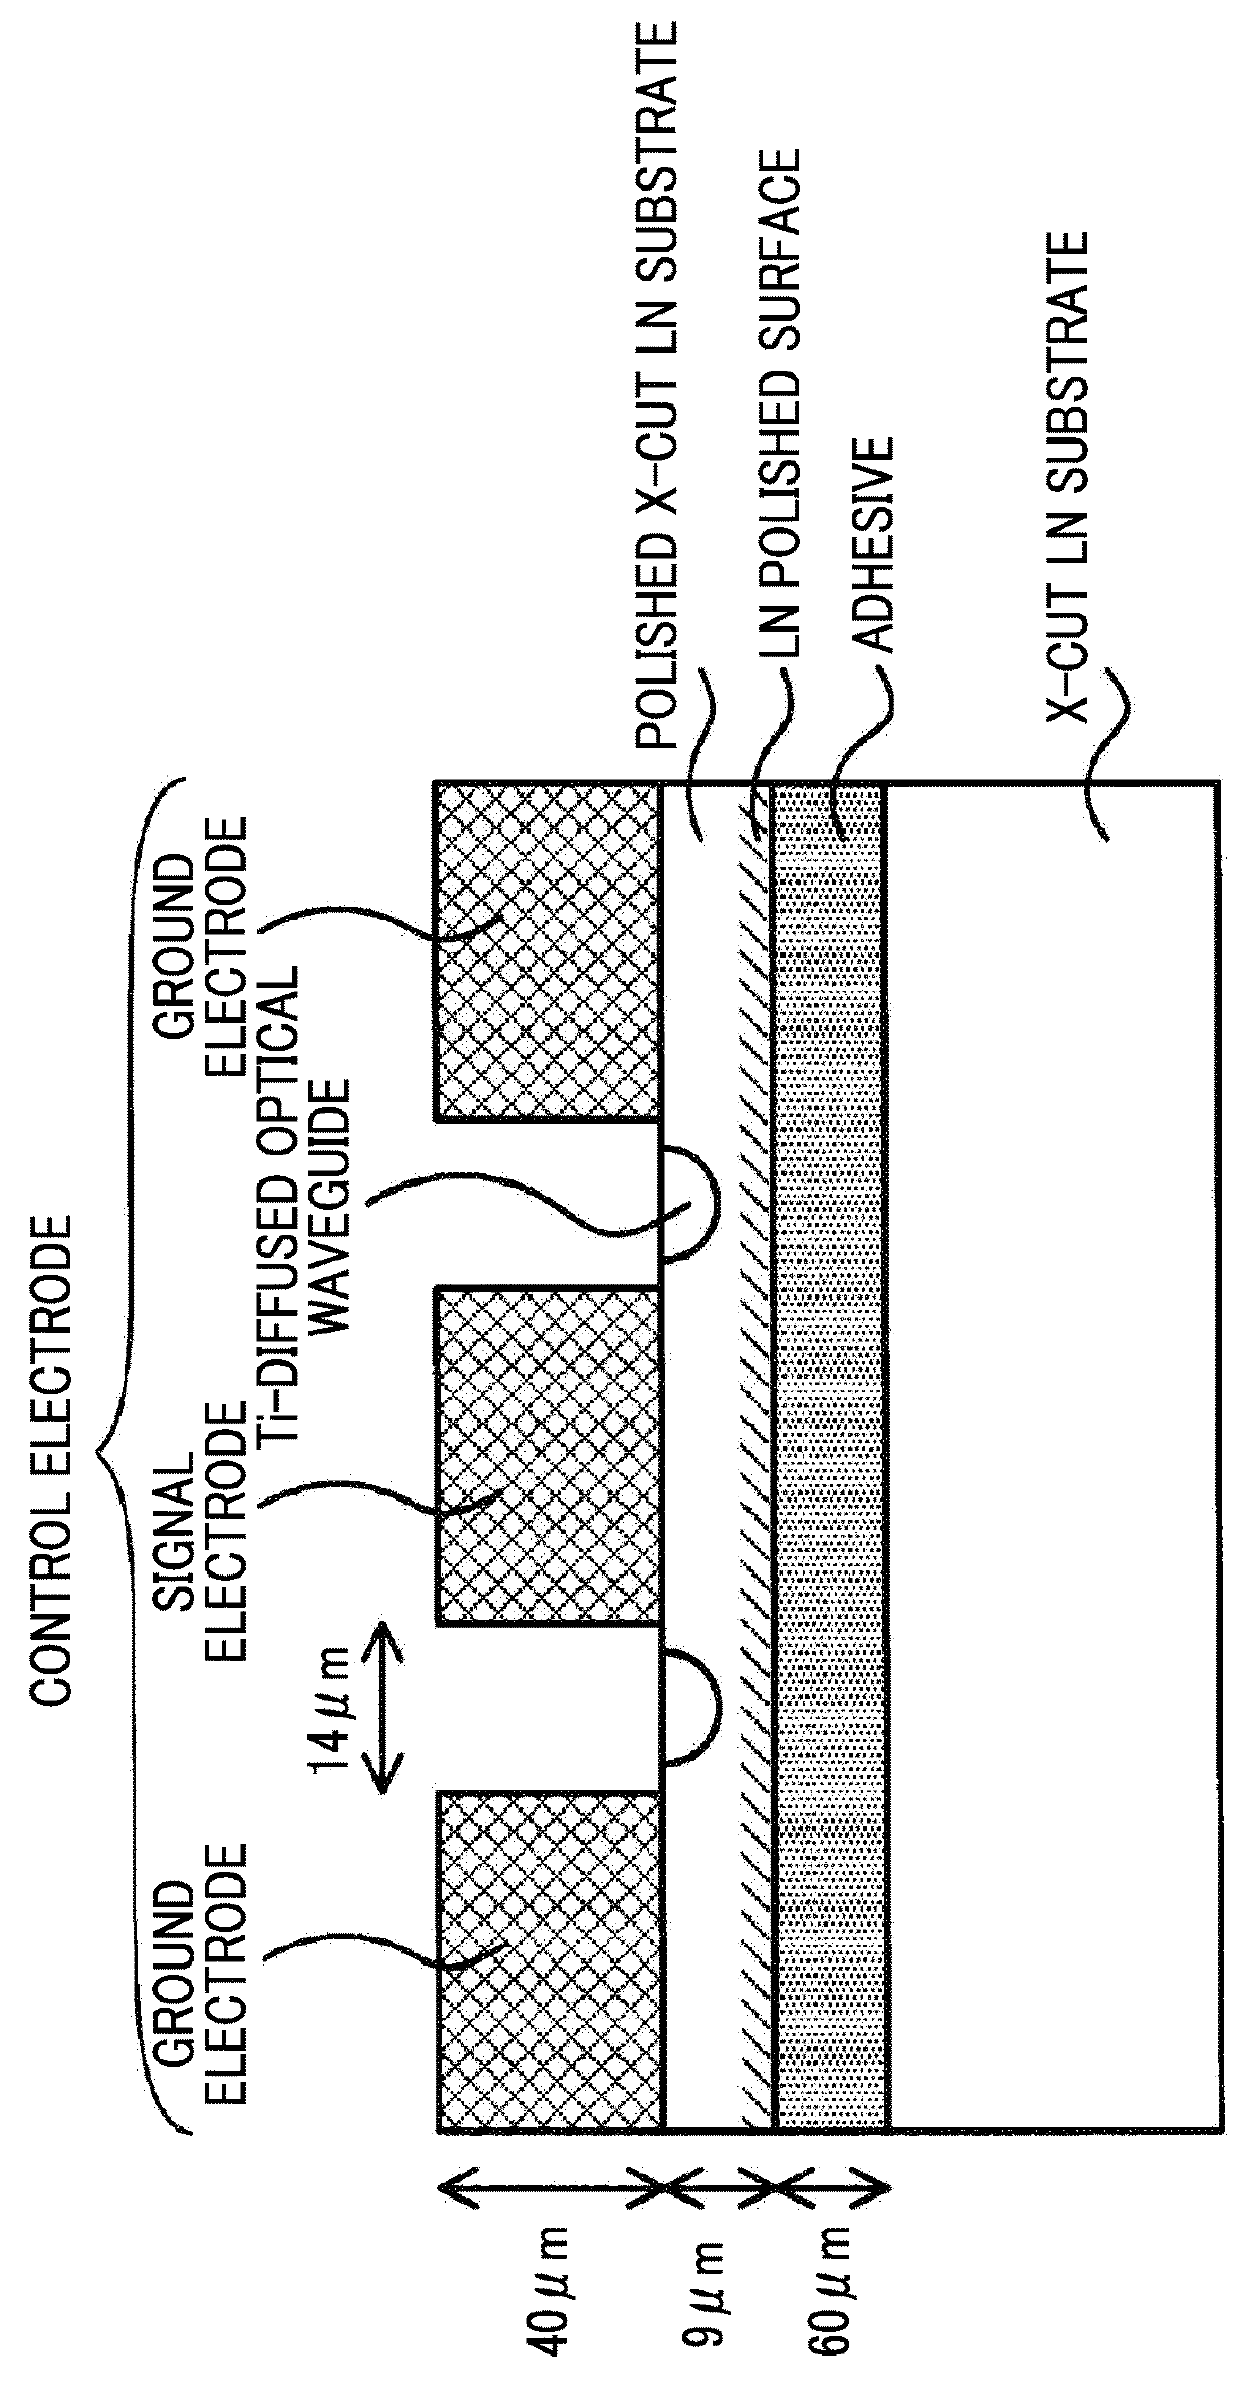 Thin-plate ln optical control device